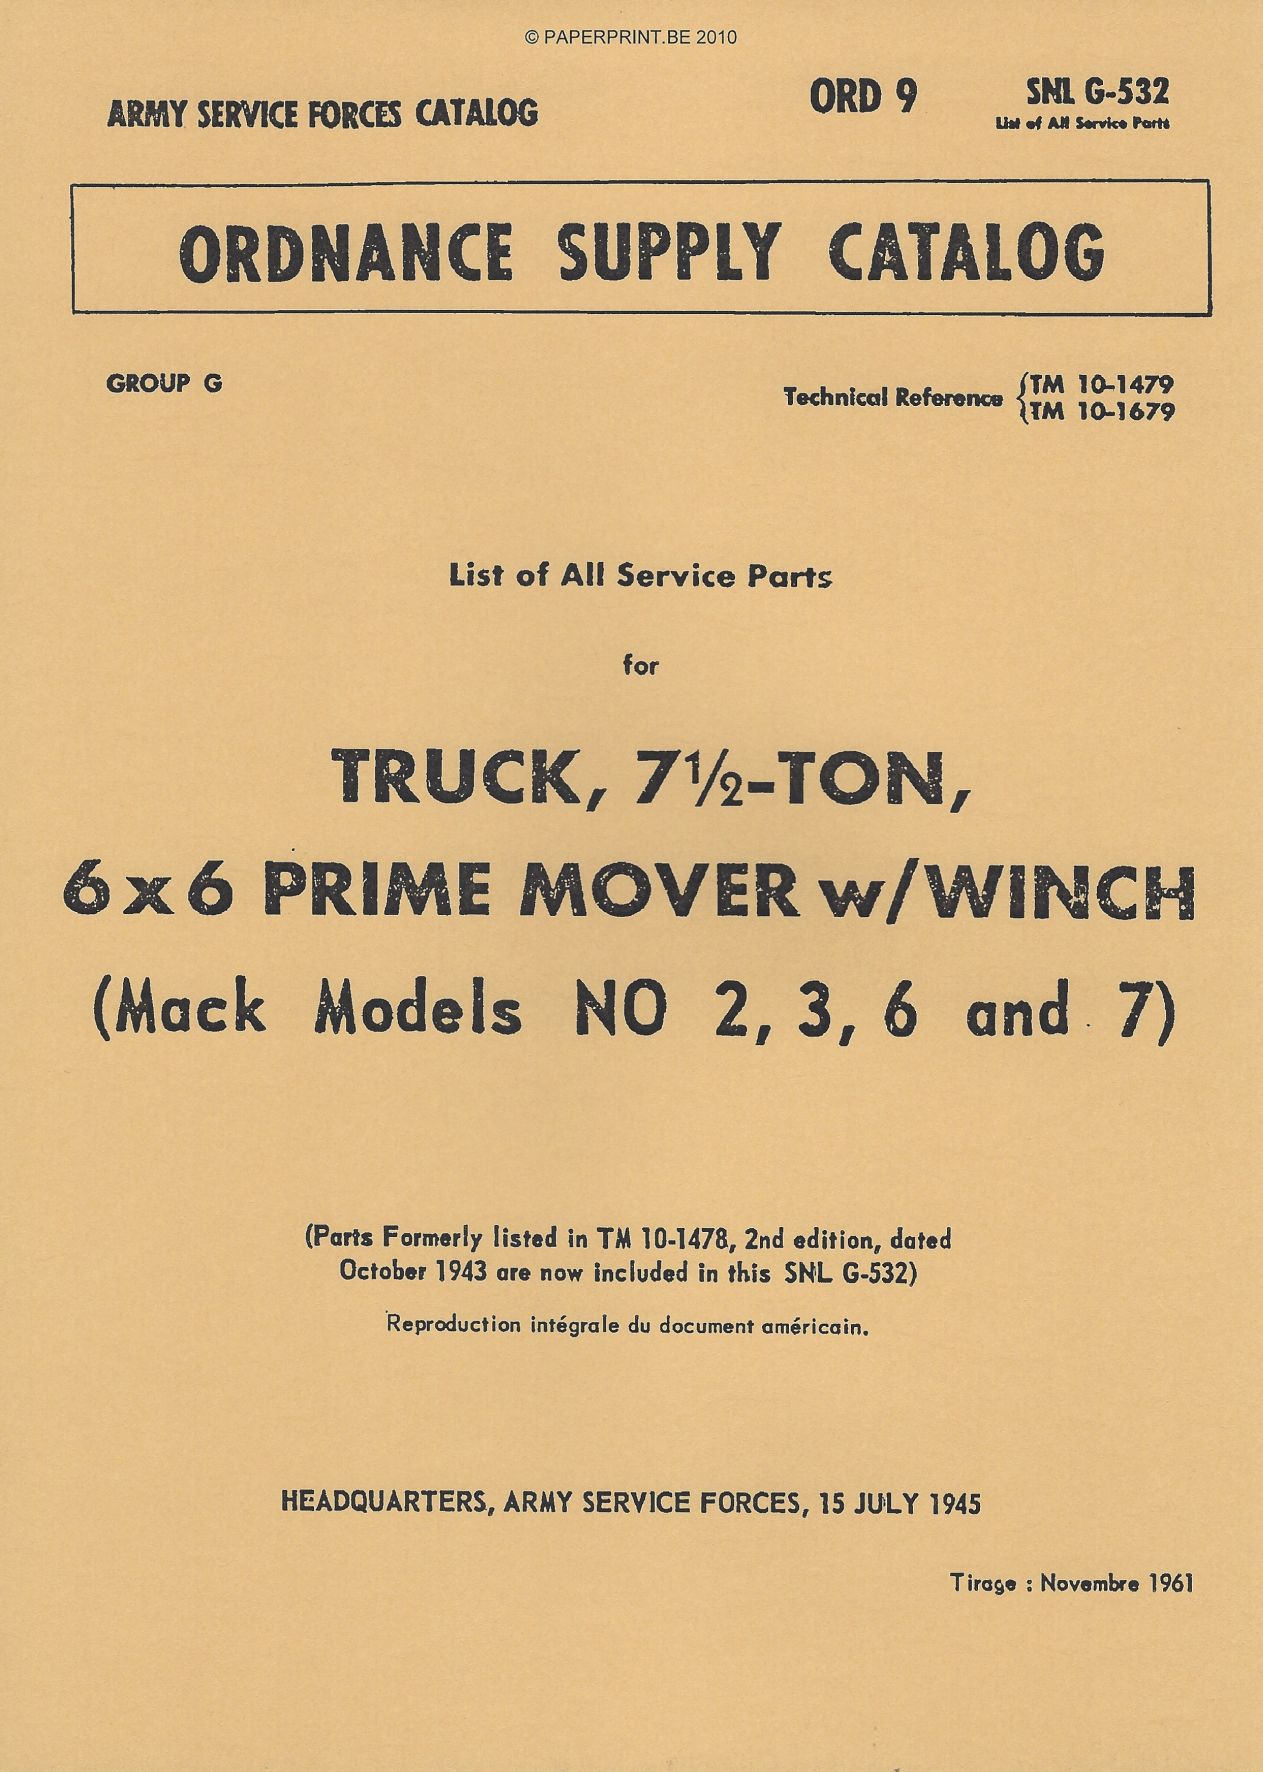 SNL G-532 US PARTS LIST FOR TRUCK, 7 ½ - TON, 6x6 PRIME MOVER W/ WINCH (MACK MODELS NO 2, 3, 6 AND 7)